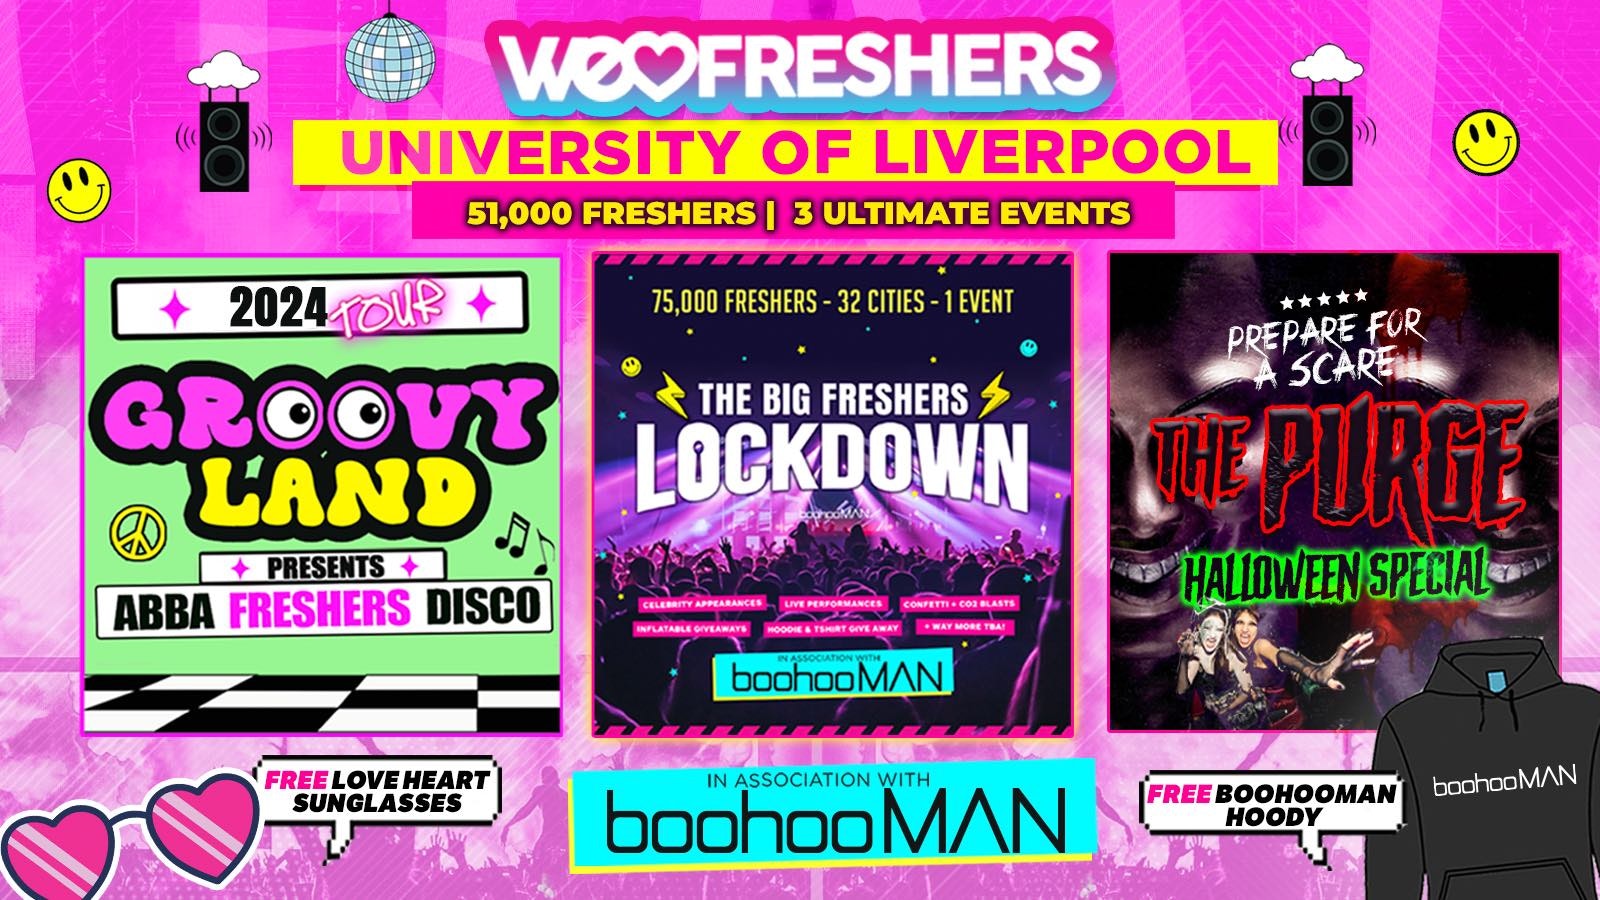 WE LOVE LIVERPOOL UNI FRESHERS 2024 in association with boohooMAN – 3 EVENTS❗